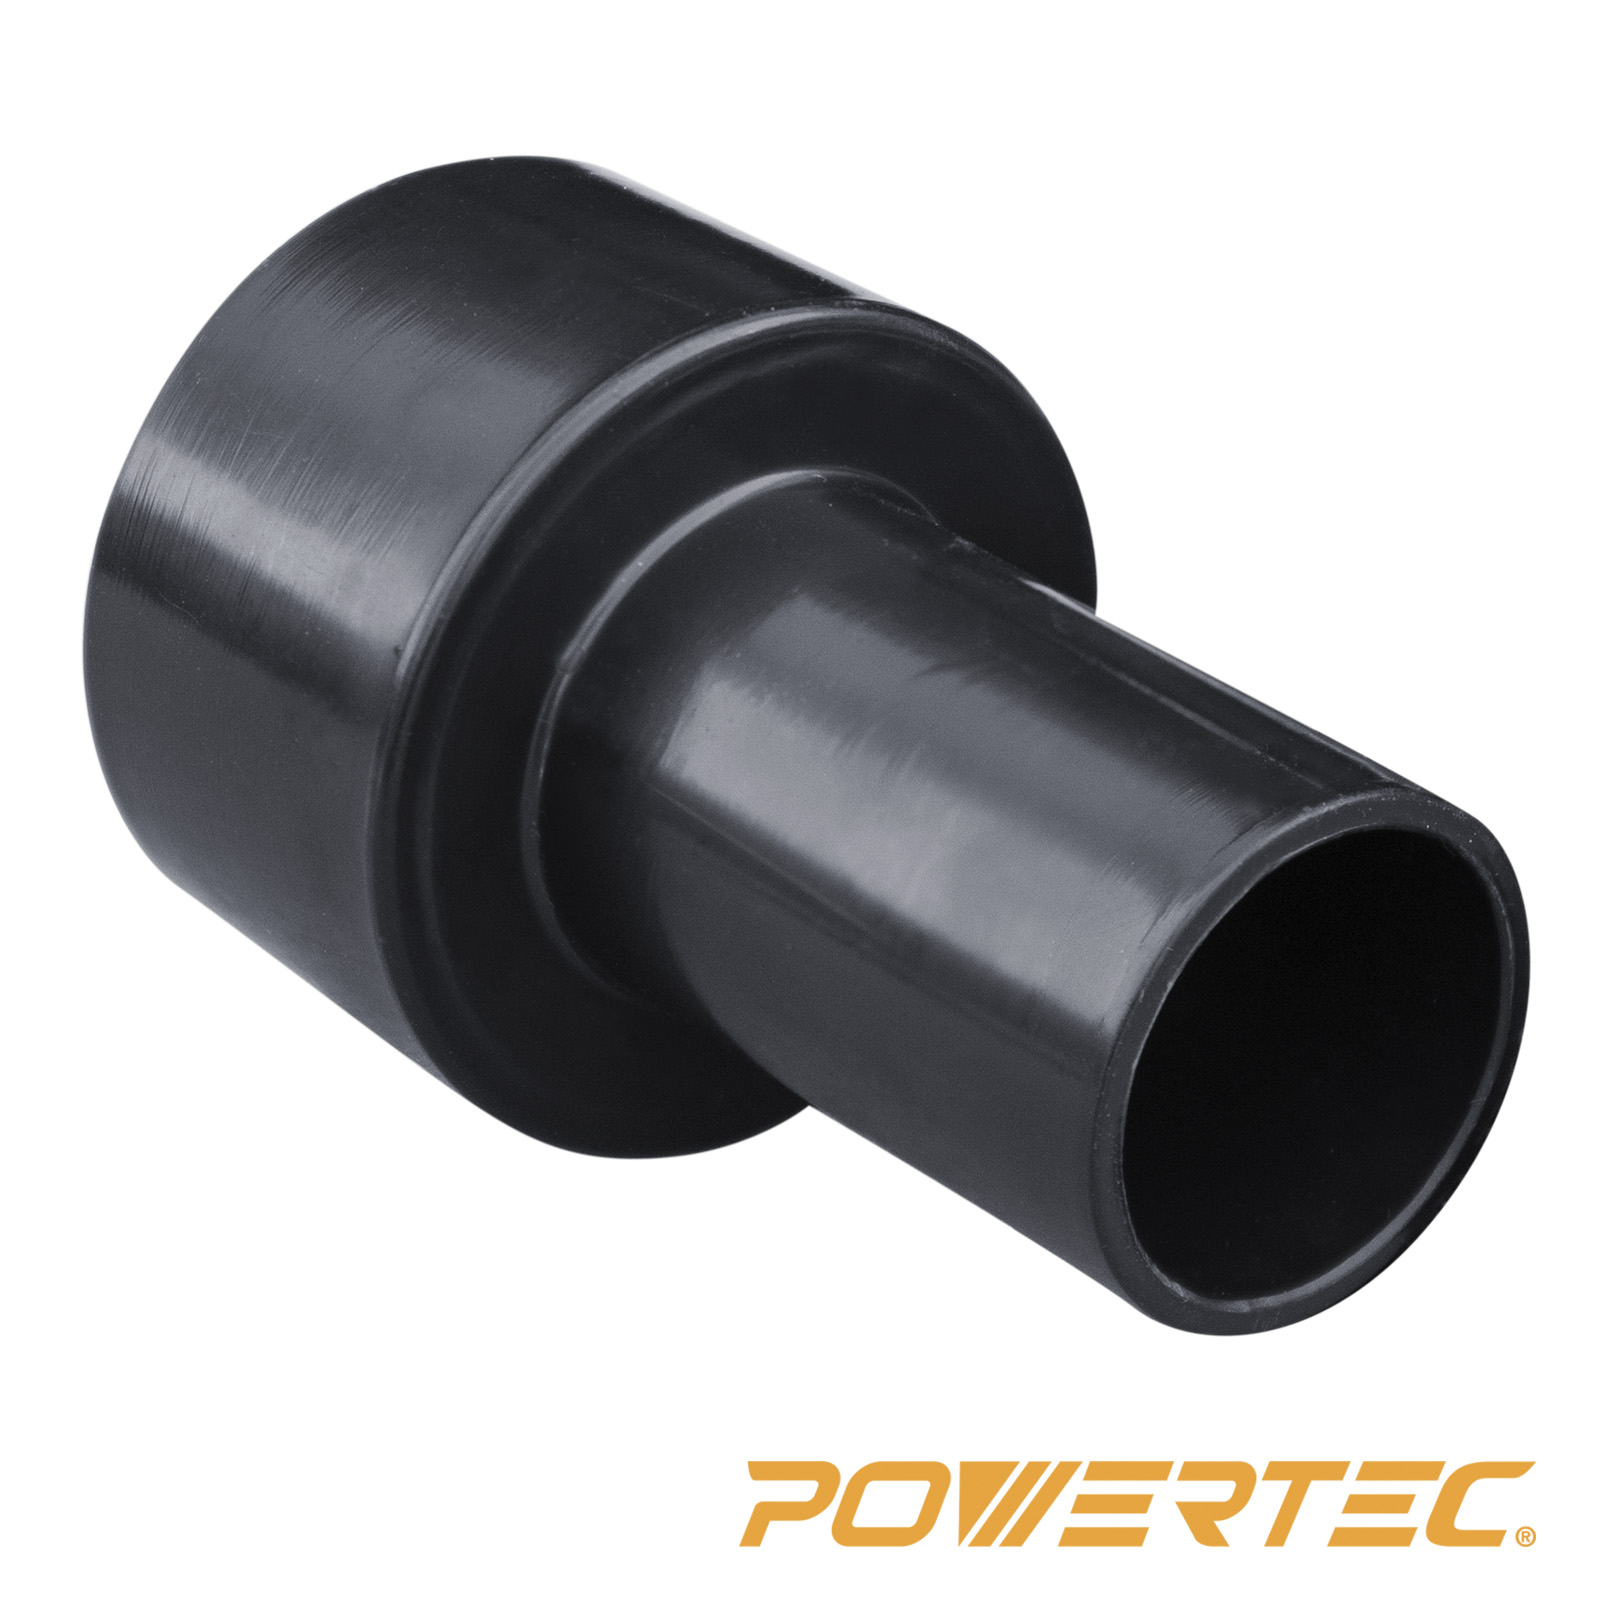 Powertec 70138 2-1/2-Inch to 1-1/2-Inch Reducer